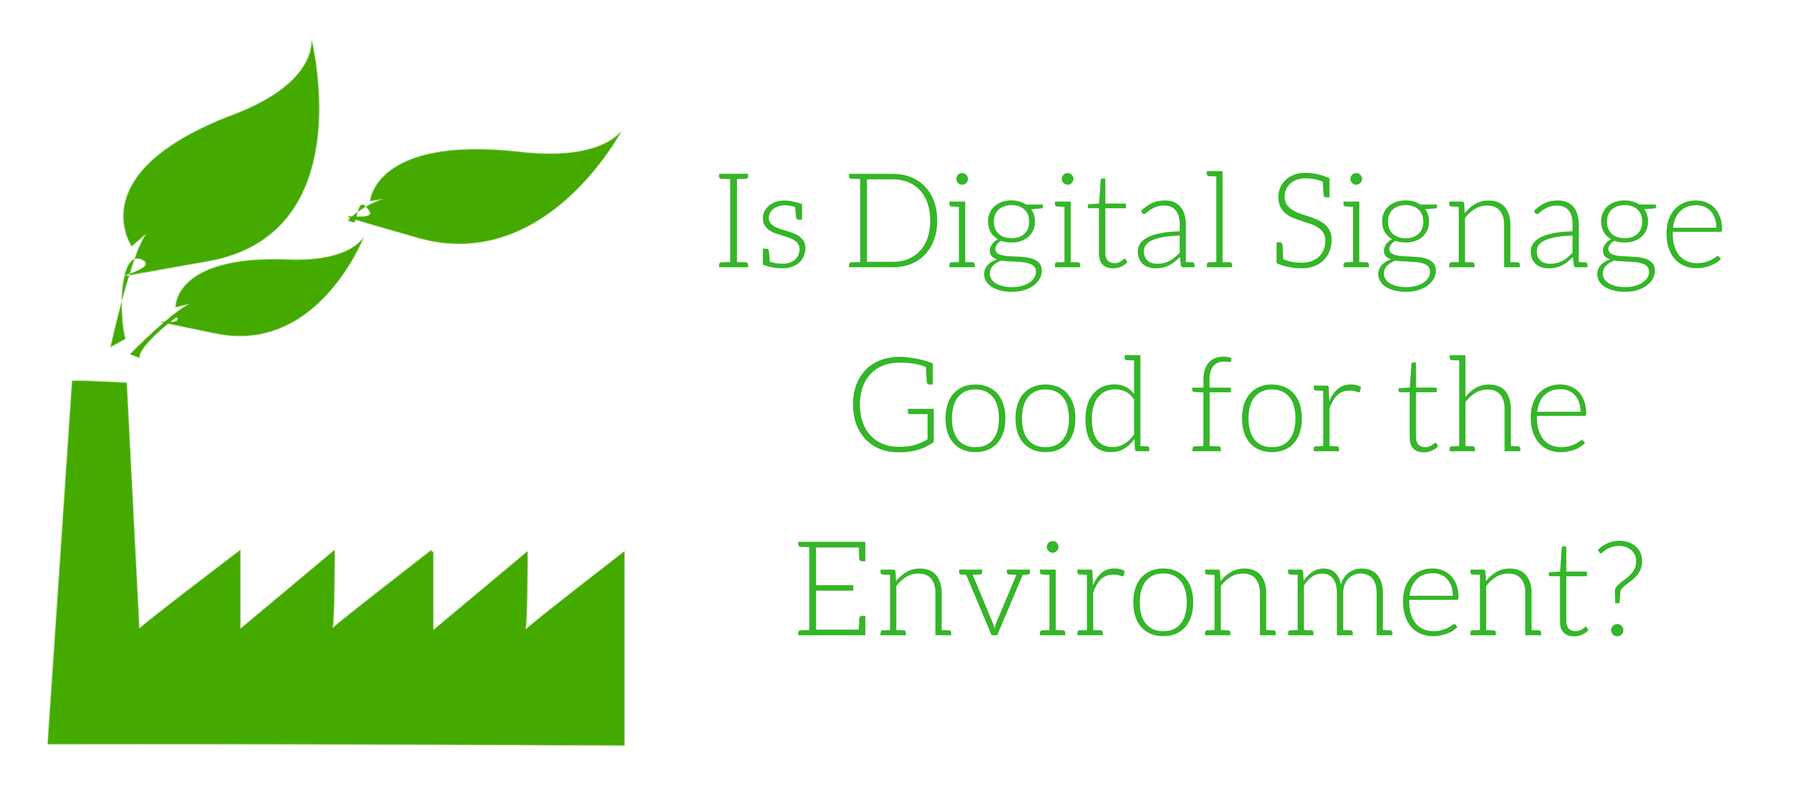 Is Digital Signage Good for the Environment